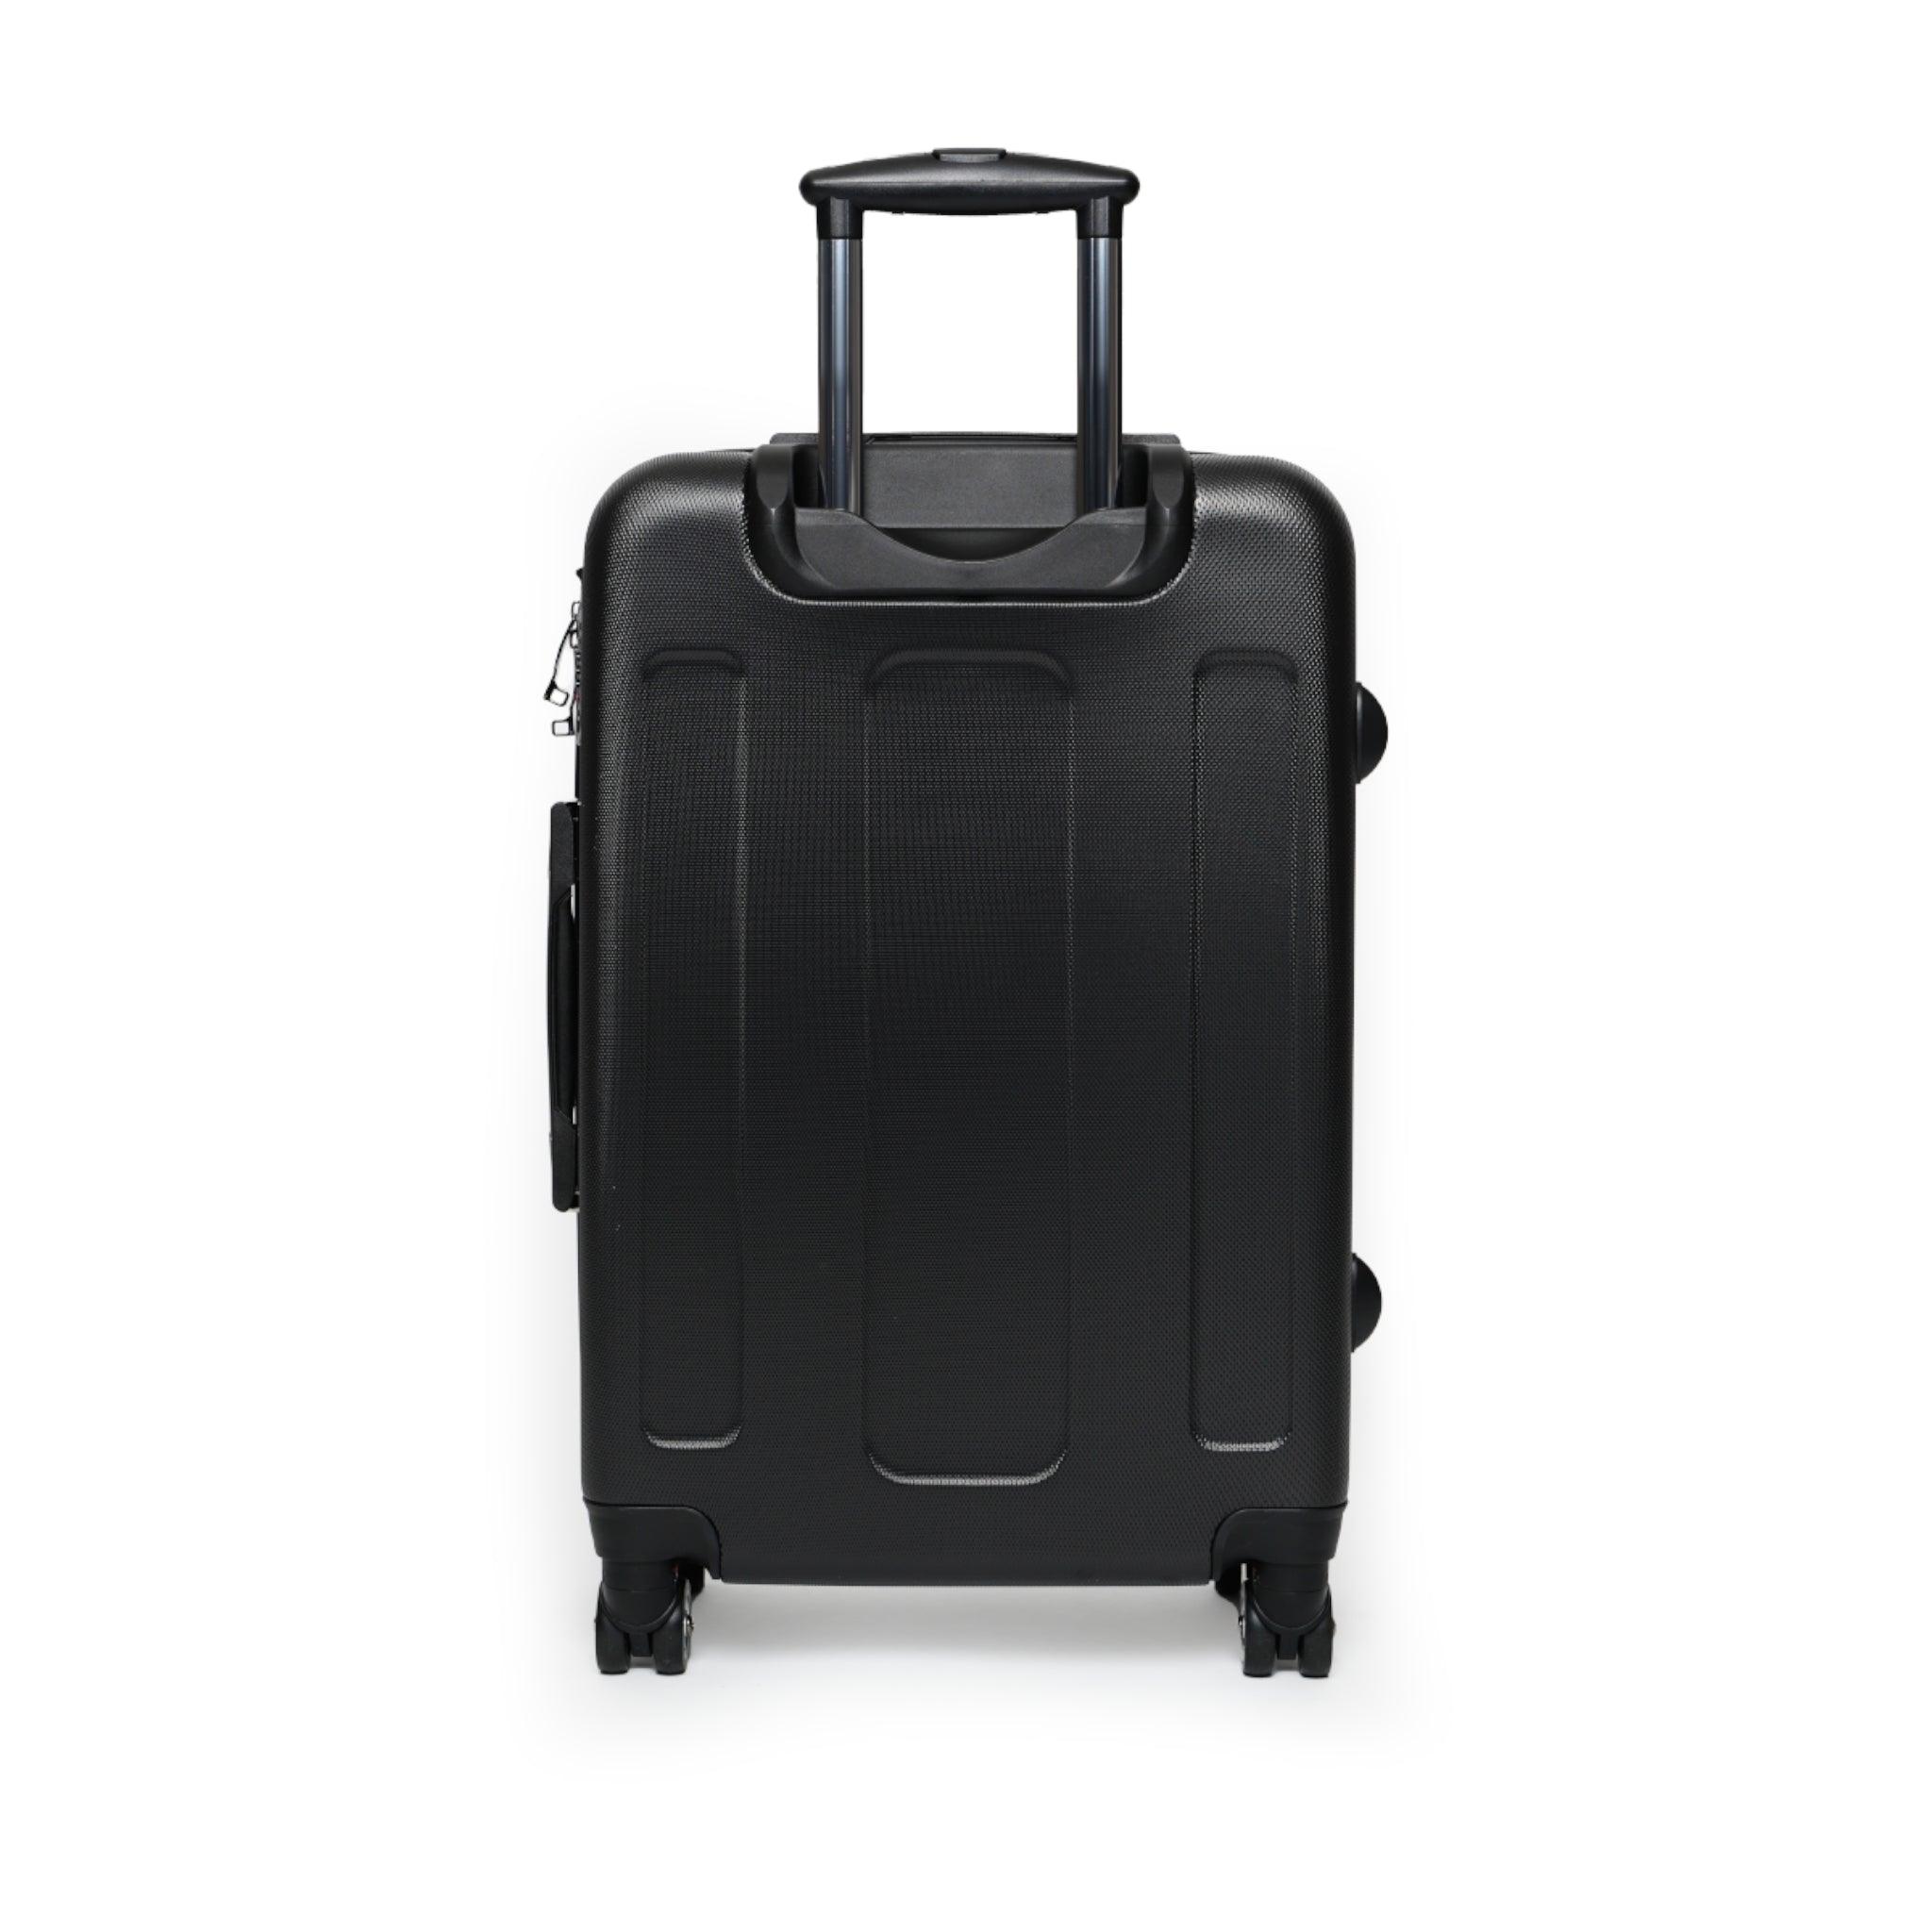 Sechie Luggage Collection - Blissfully Brand